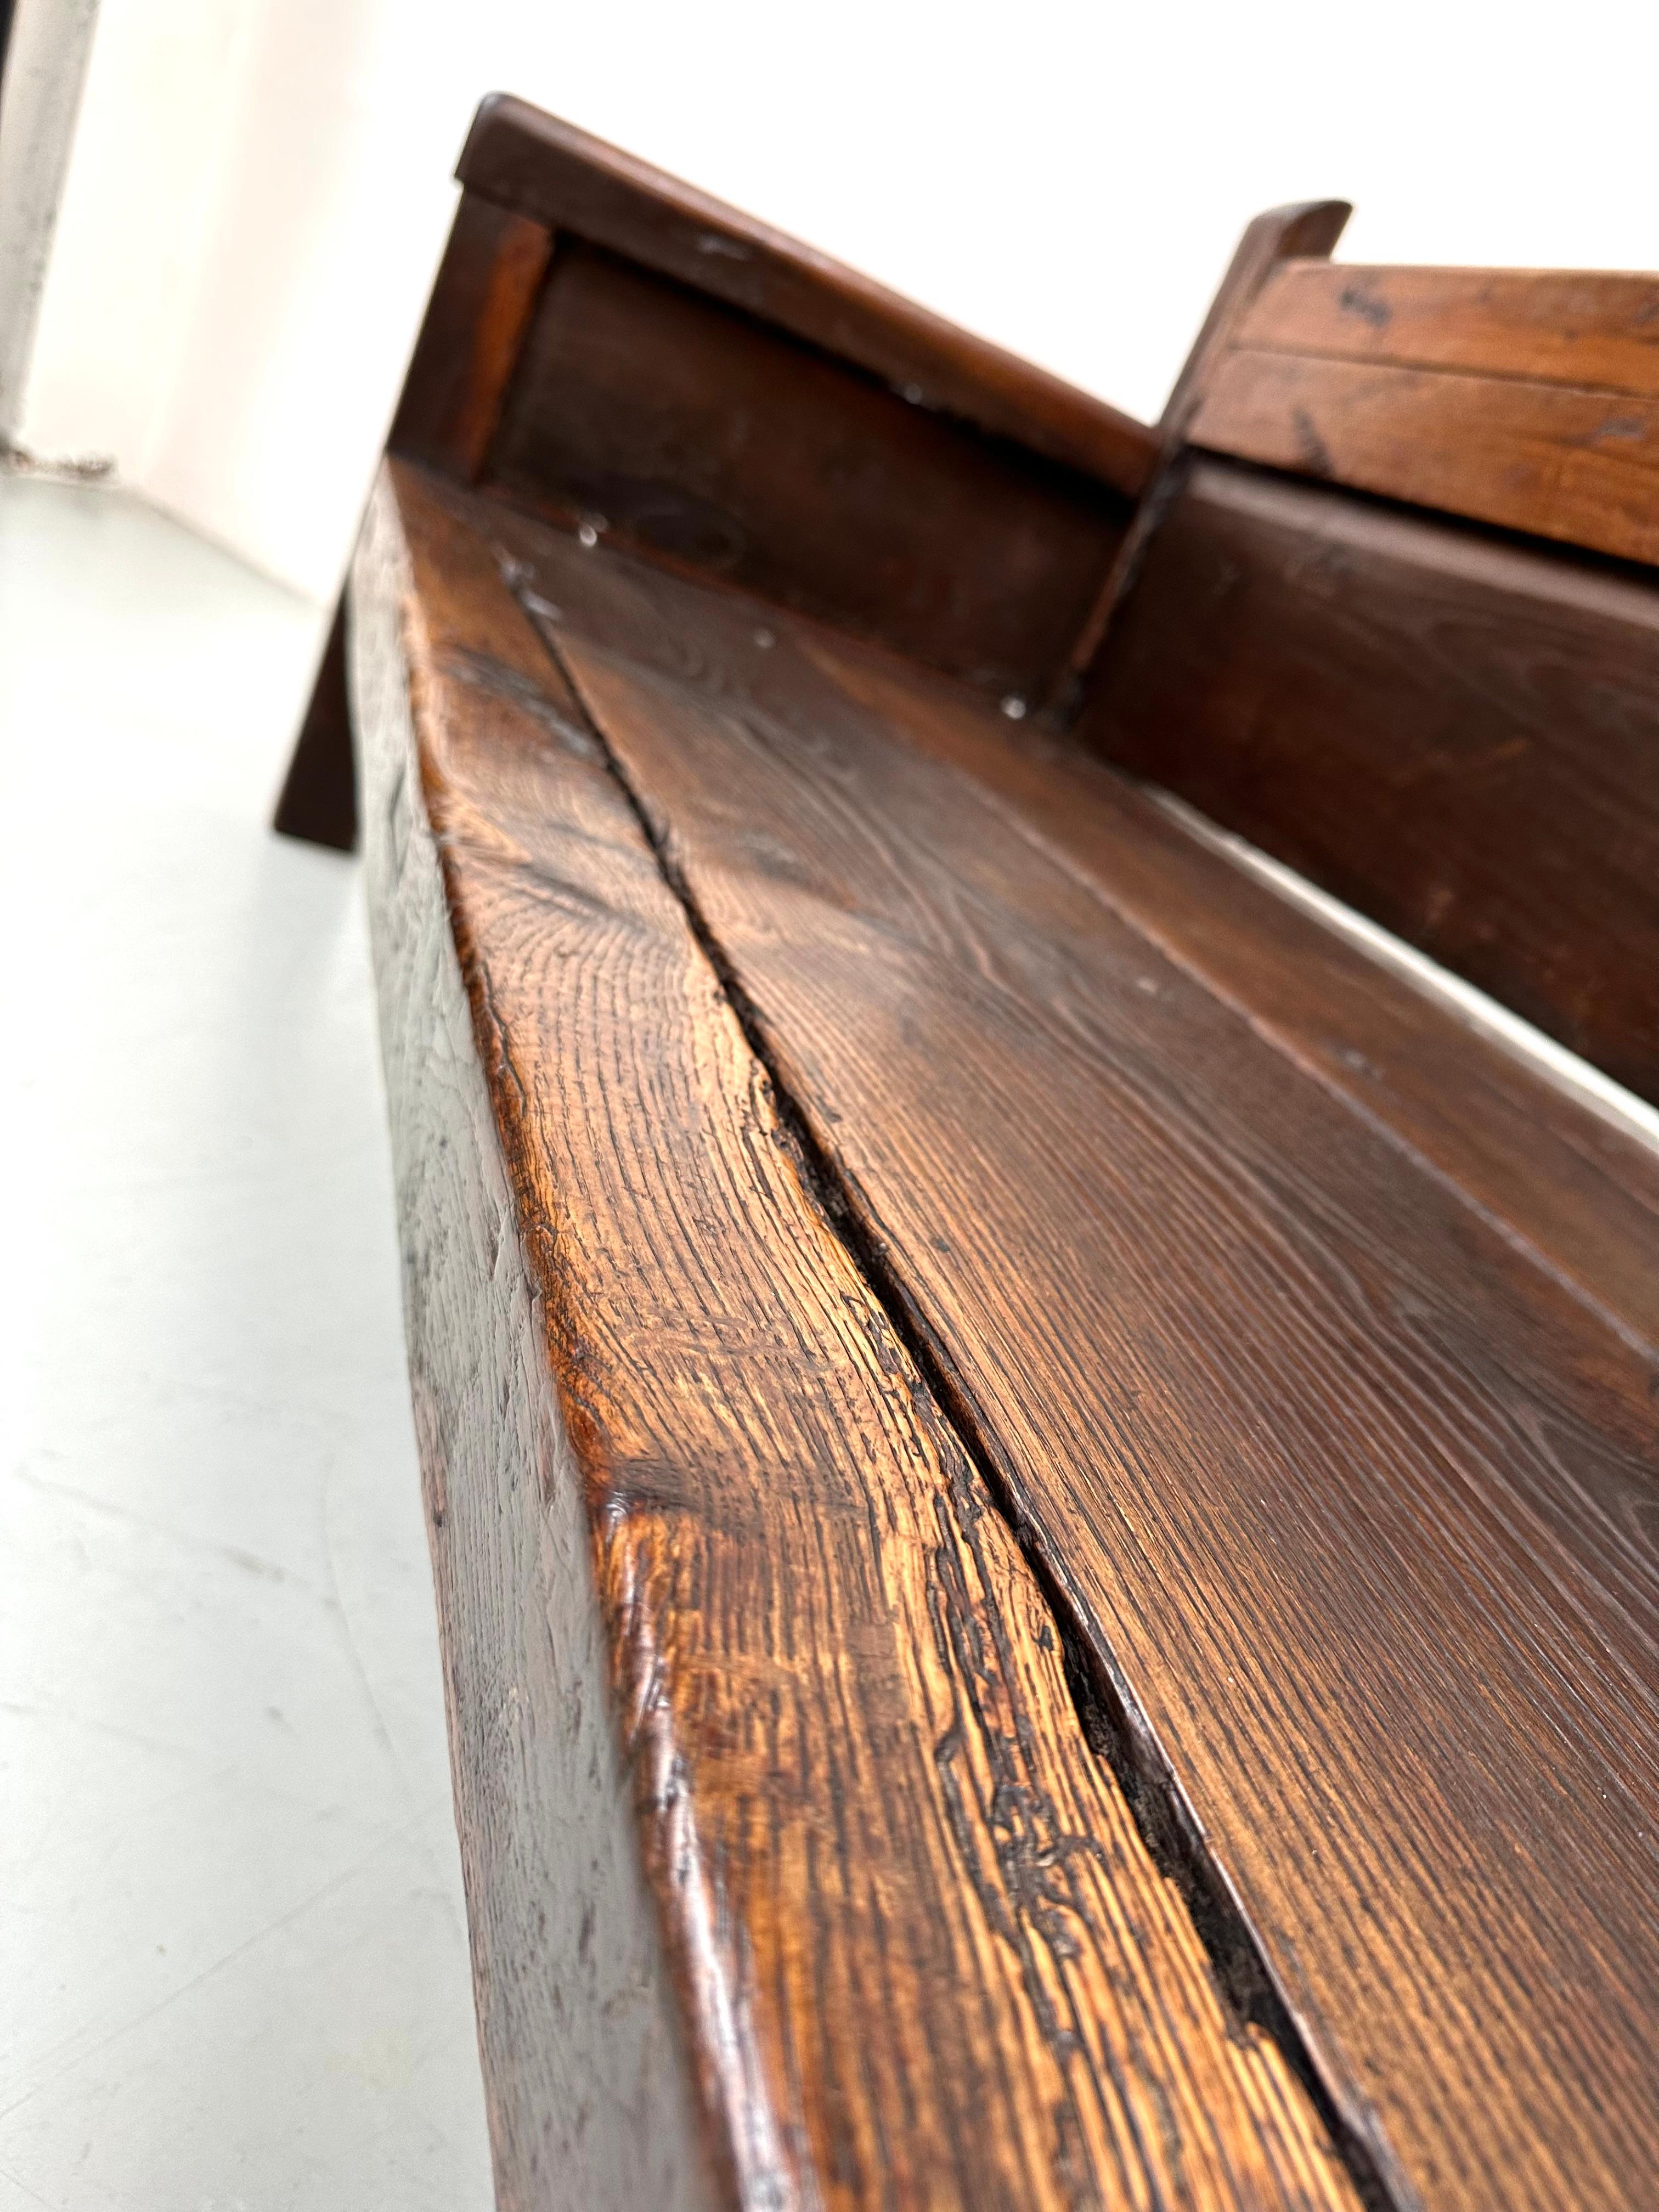 Antique Handmade Minimalistic Spanish Chestnut Wood Bench, Early 19th Century For Sale 6